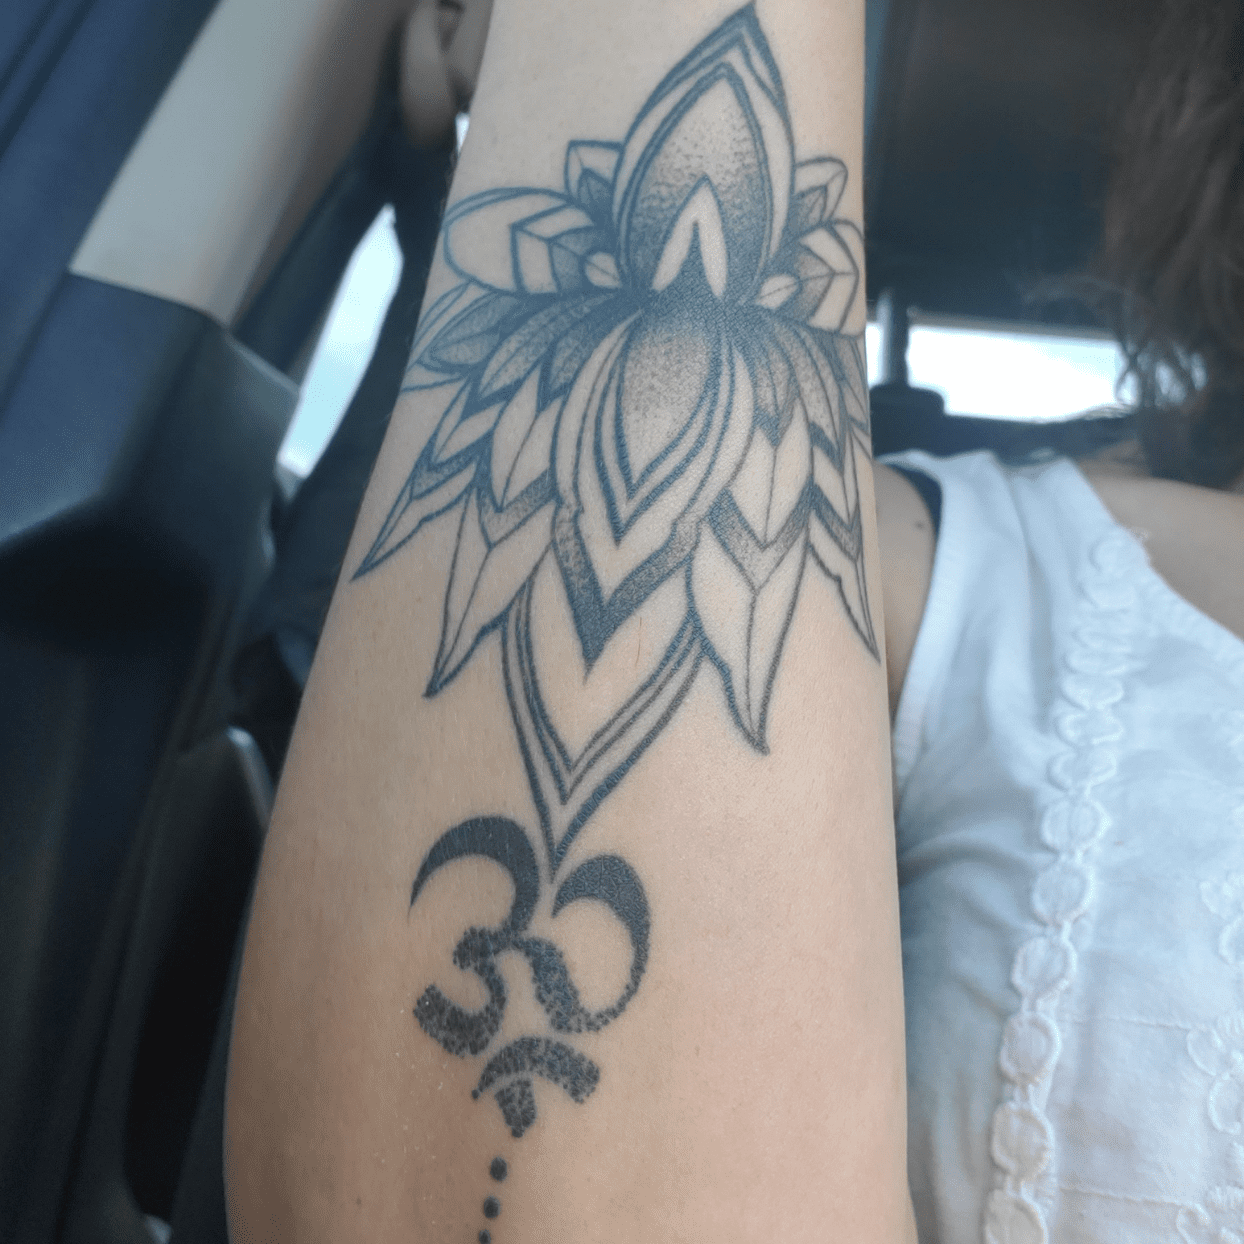 woman in car with large lotus ohm tattoo on arm